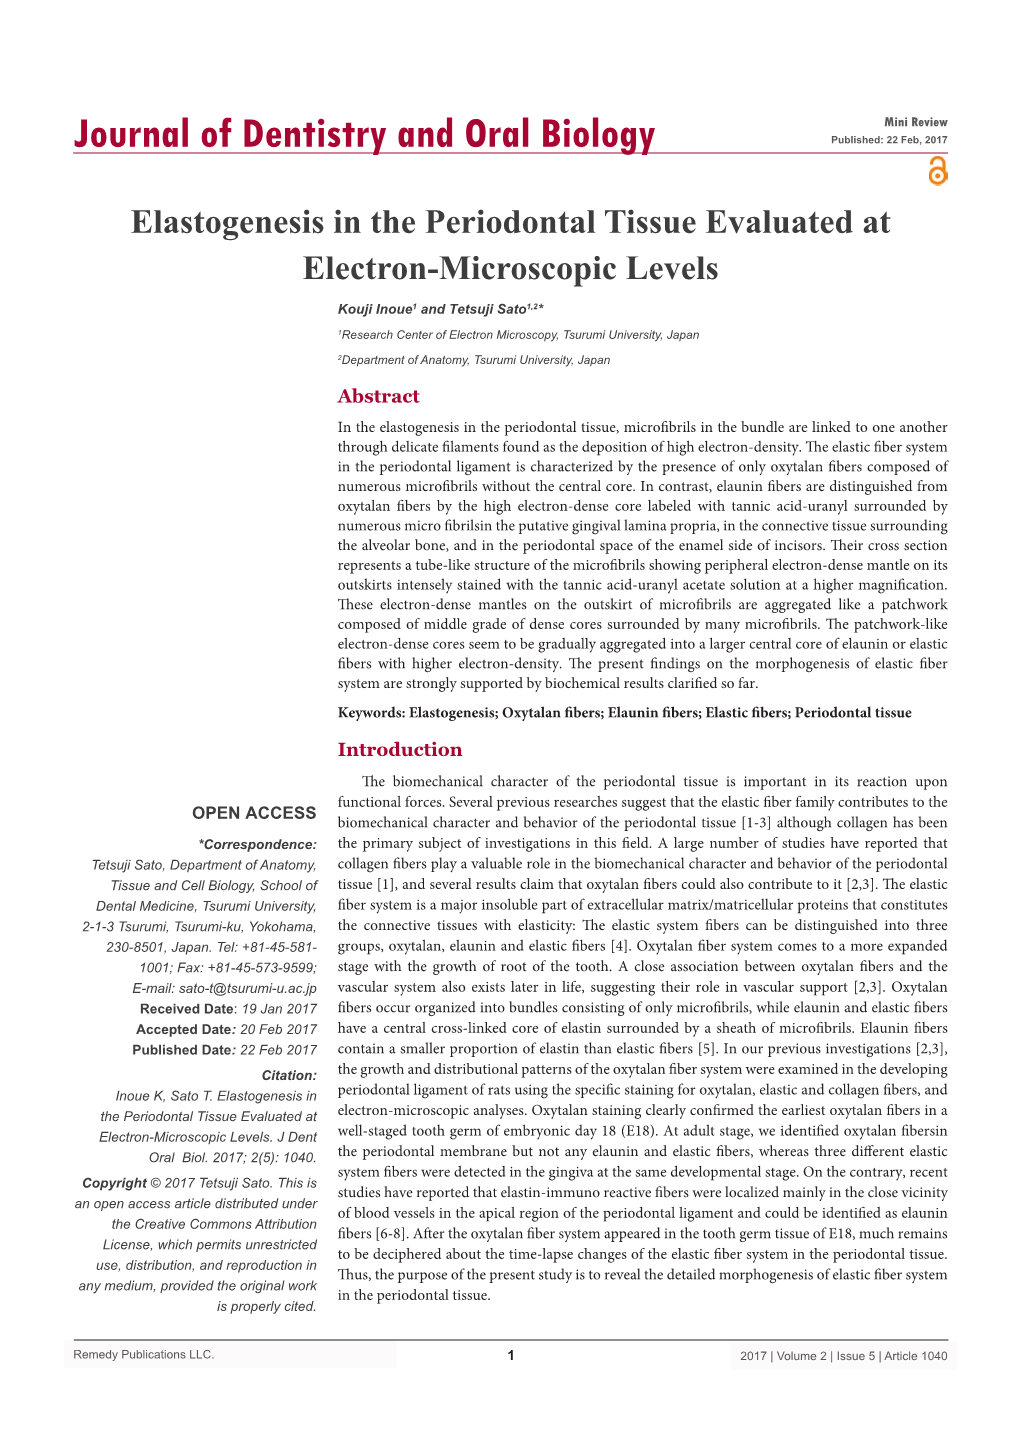 Elastogenesis in the Periodontal Tissue Evaluated at Electron-Microscopic Levels